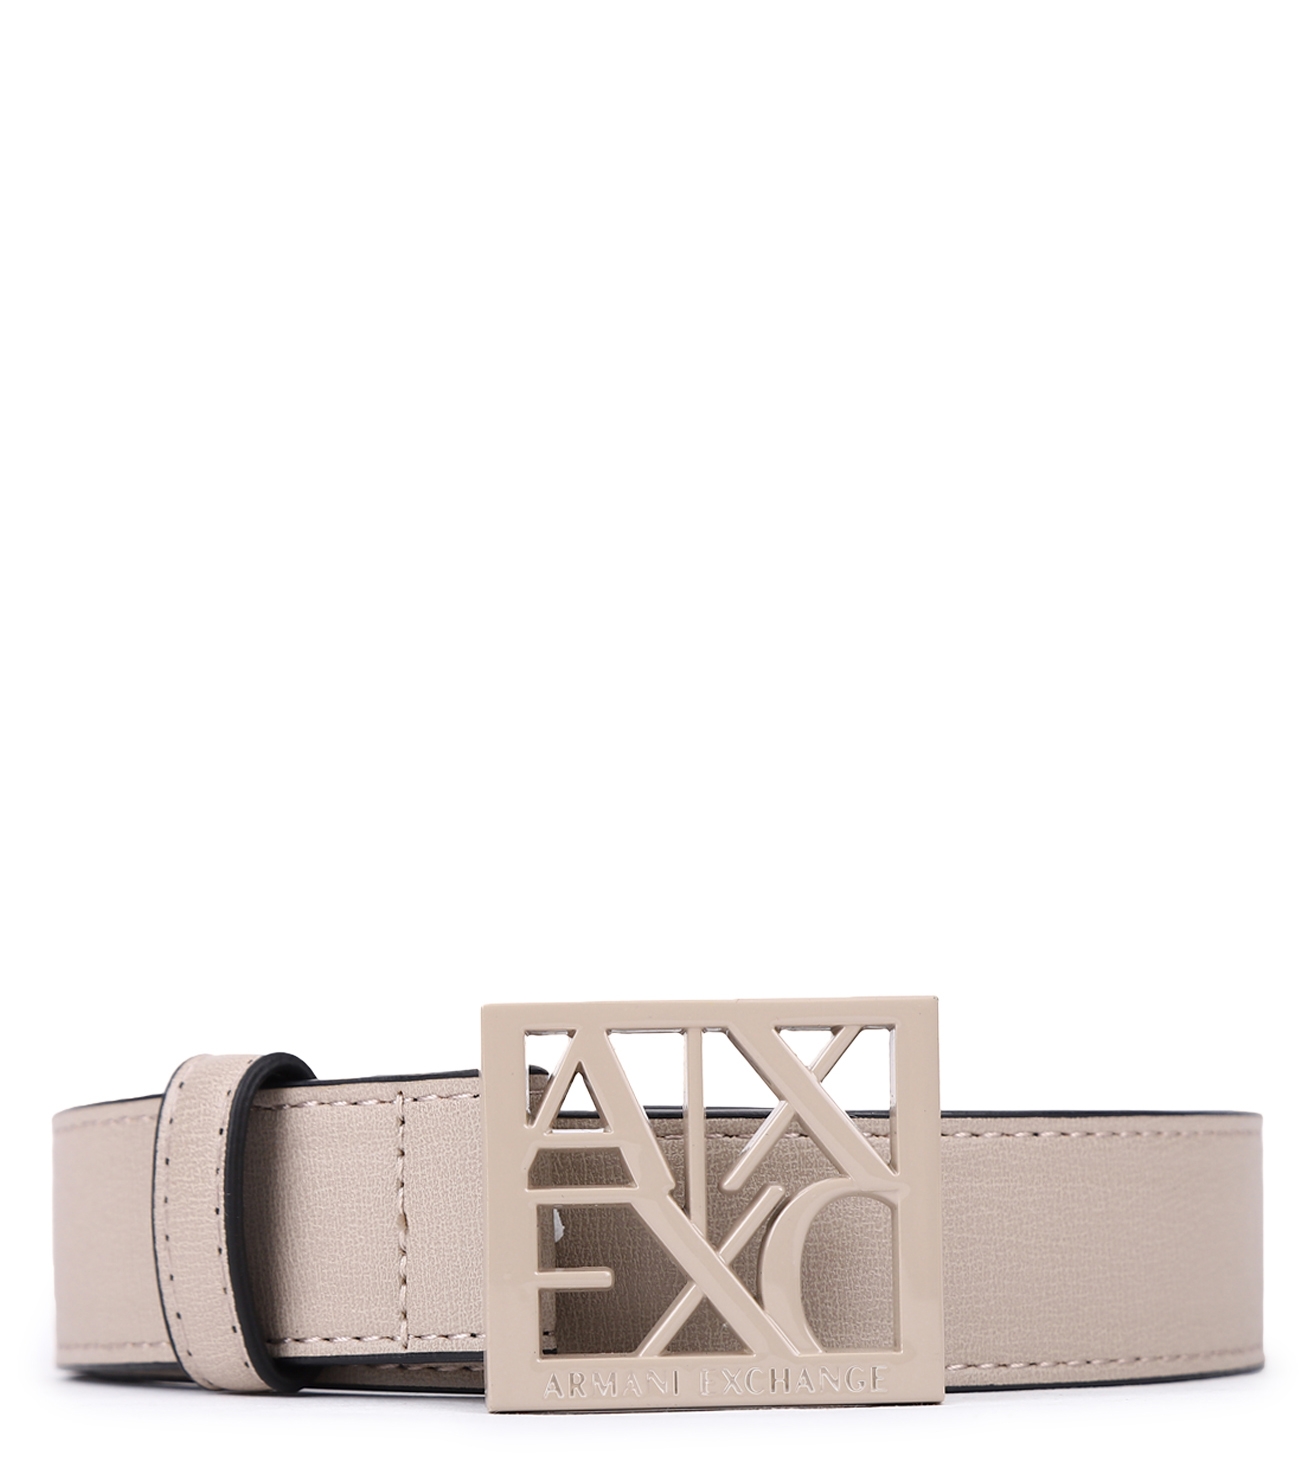 XZQTIVE Reversible Leather Belts for Women with Rotated Metal Buckle  Black/Brown Women Belts